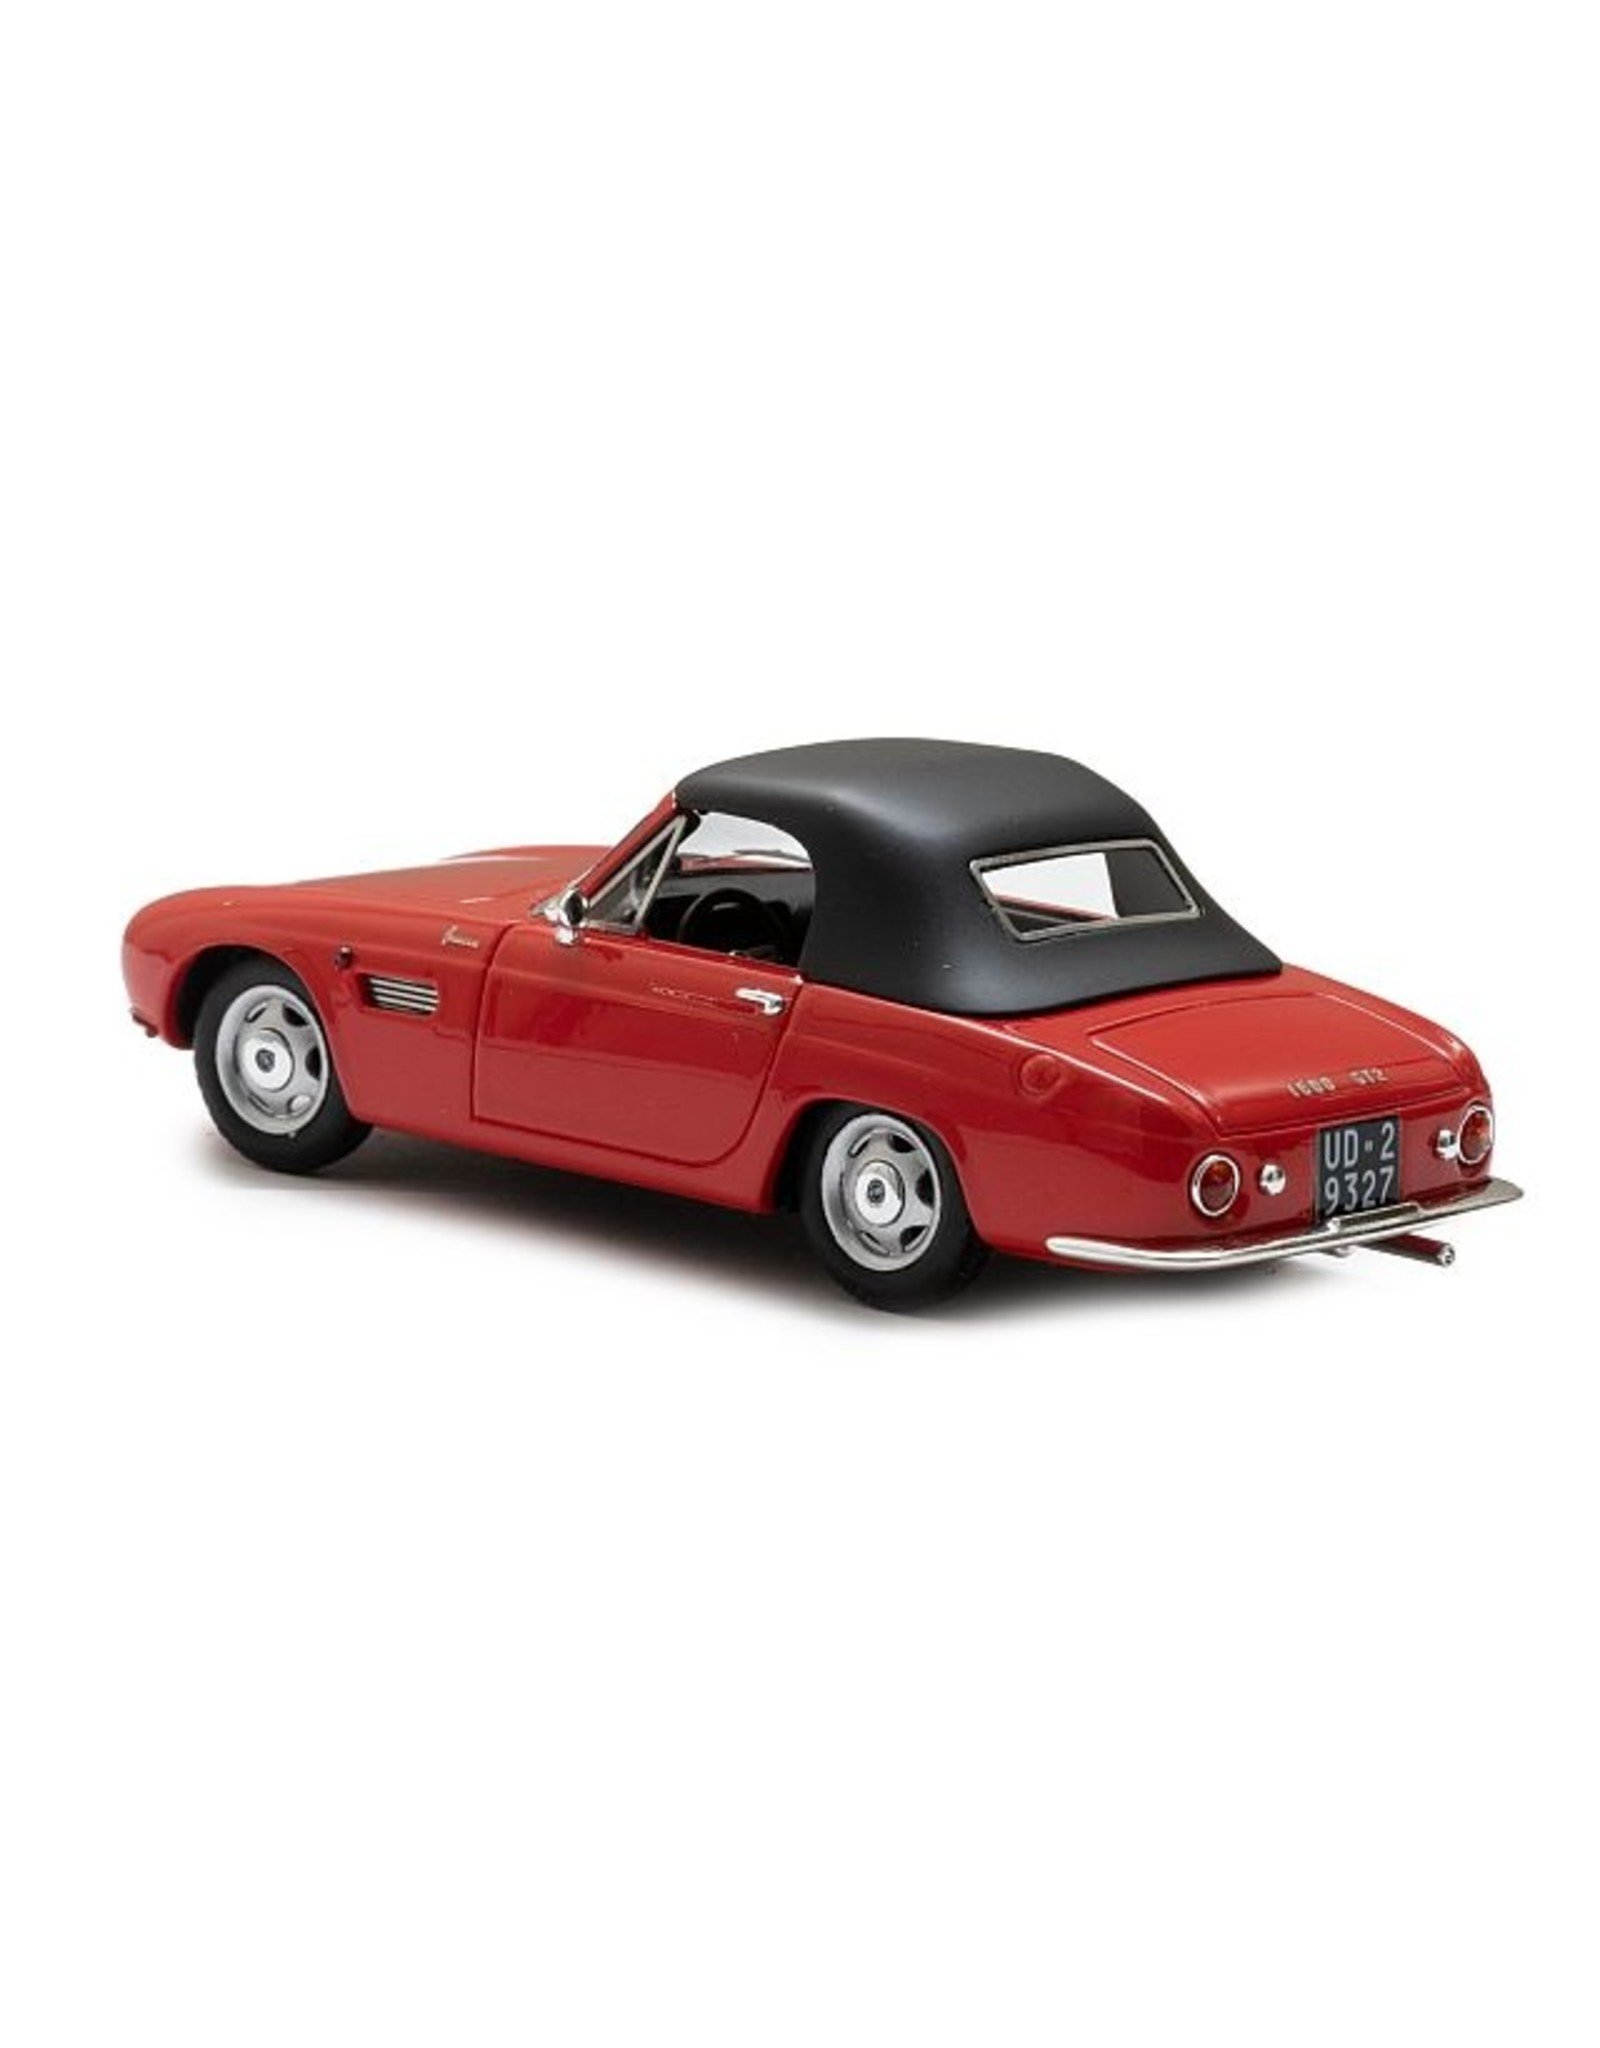 OSCA BY FISSORE Osca 1600 GT by Fissore(1963)closed(red)